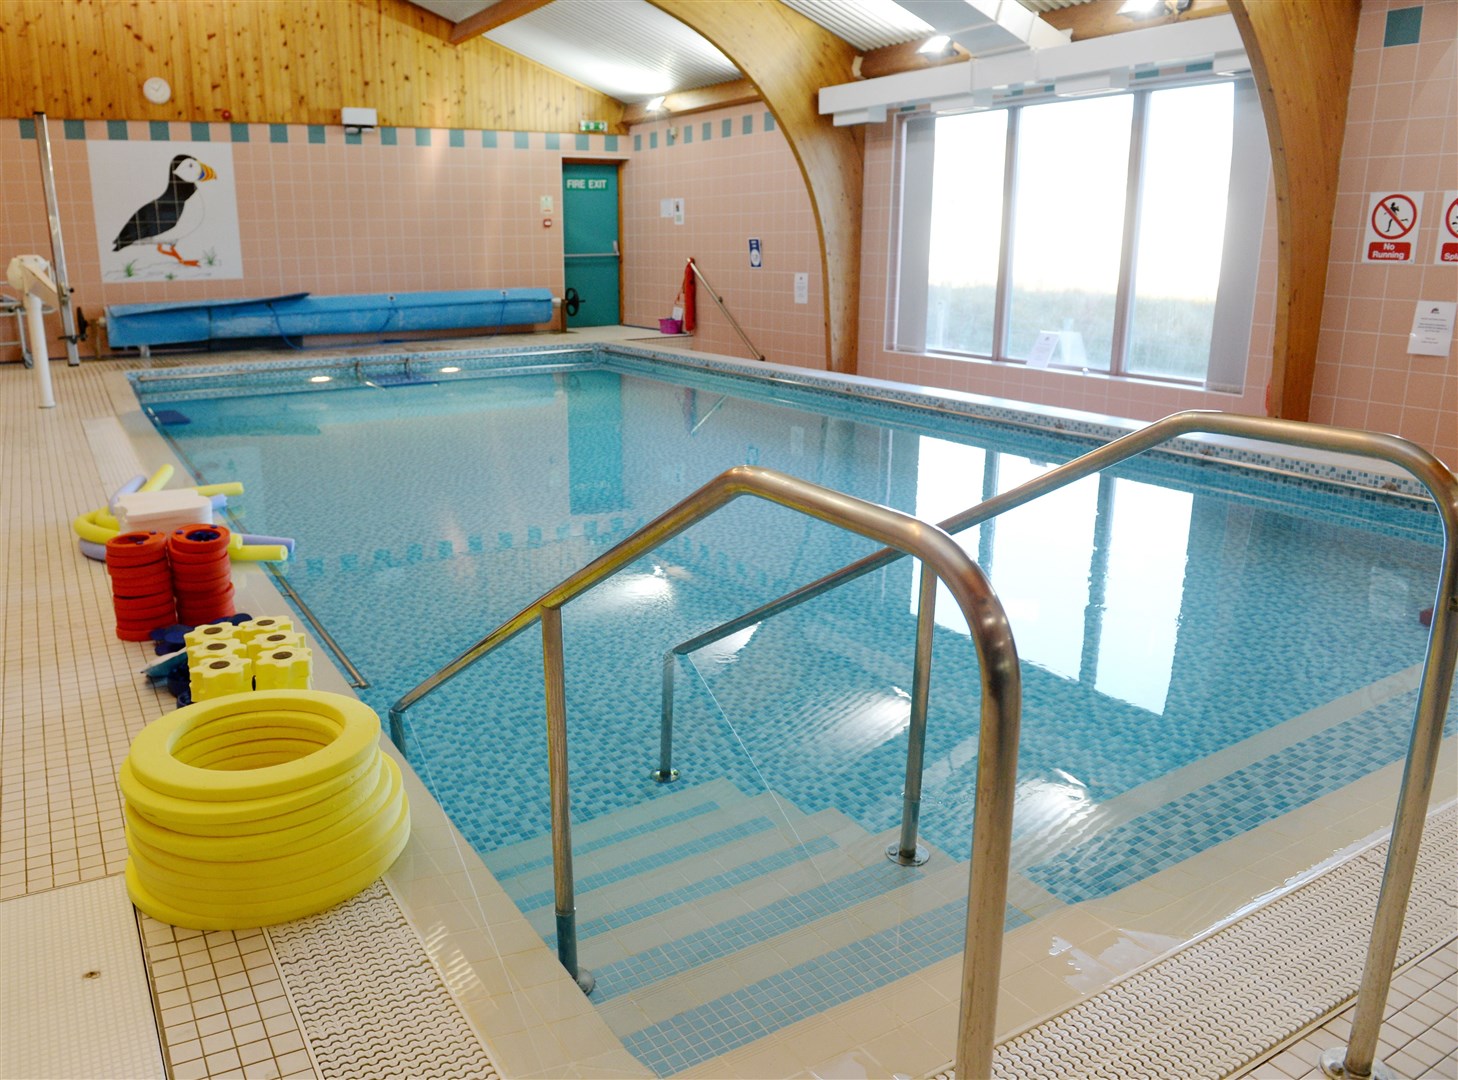 The Puffin Pool helps people with a range of conditions such as arthritis, fibromyalgia, stroke, cerebral palsy and can speed up rehabilitation after injuries and operations.